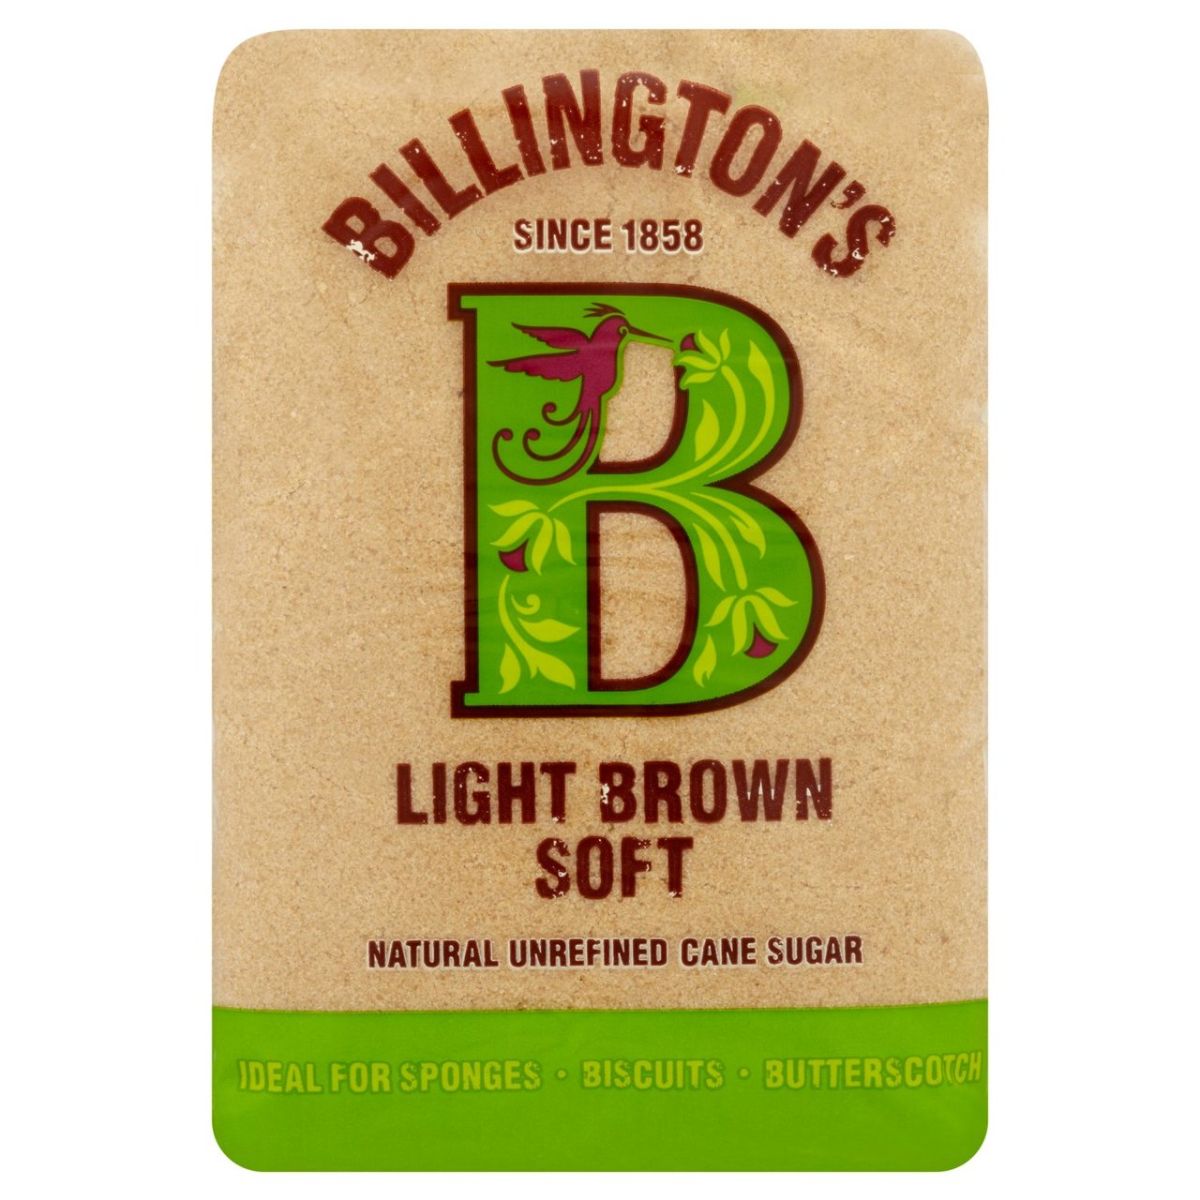 A package of Billington's Light Brown Soft Sugar, recommended for sponges, biscuits, and butterscotch.